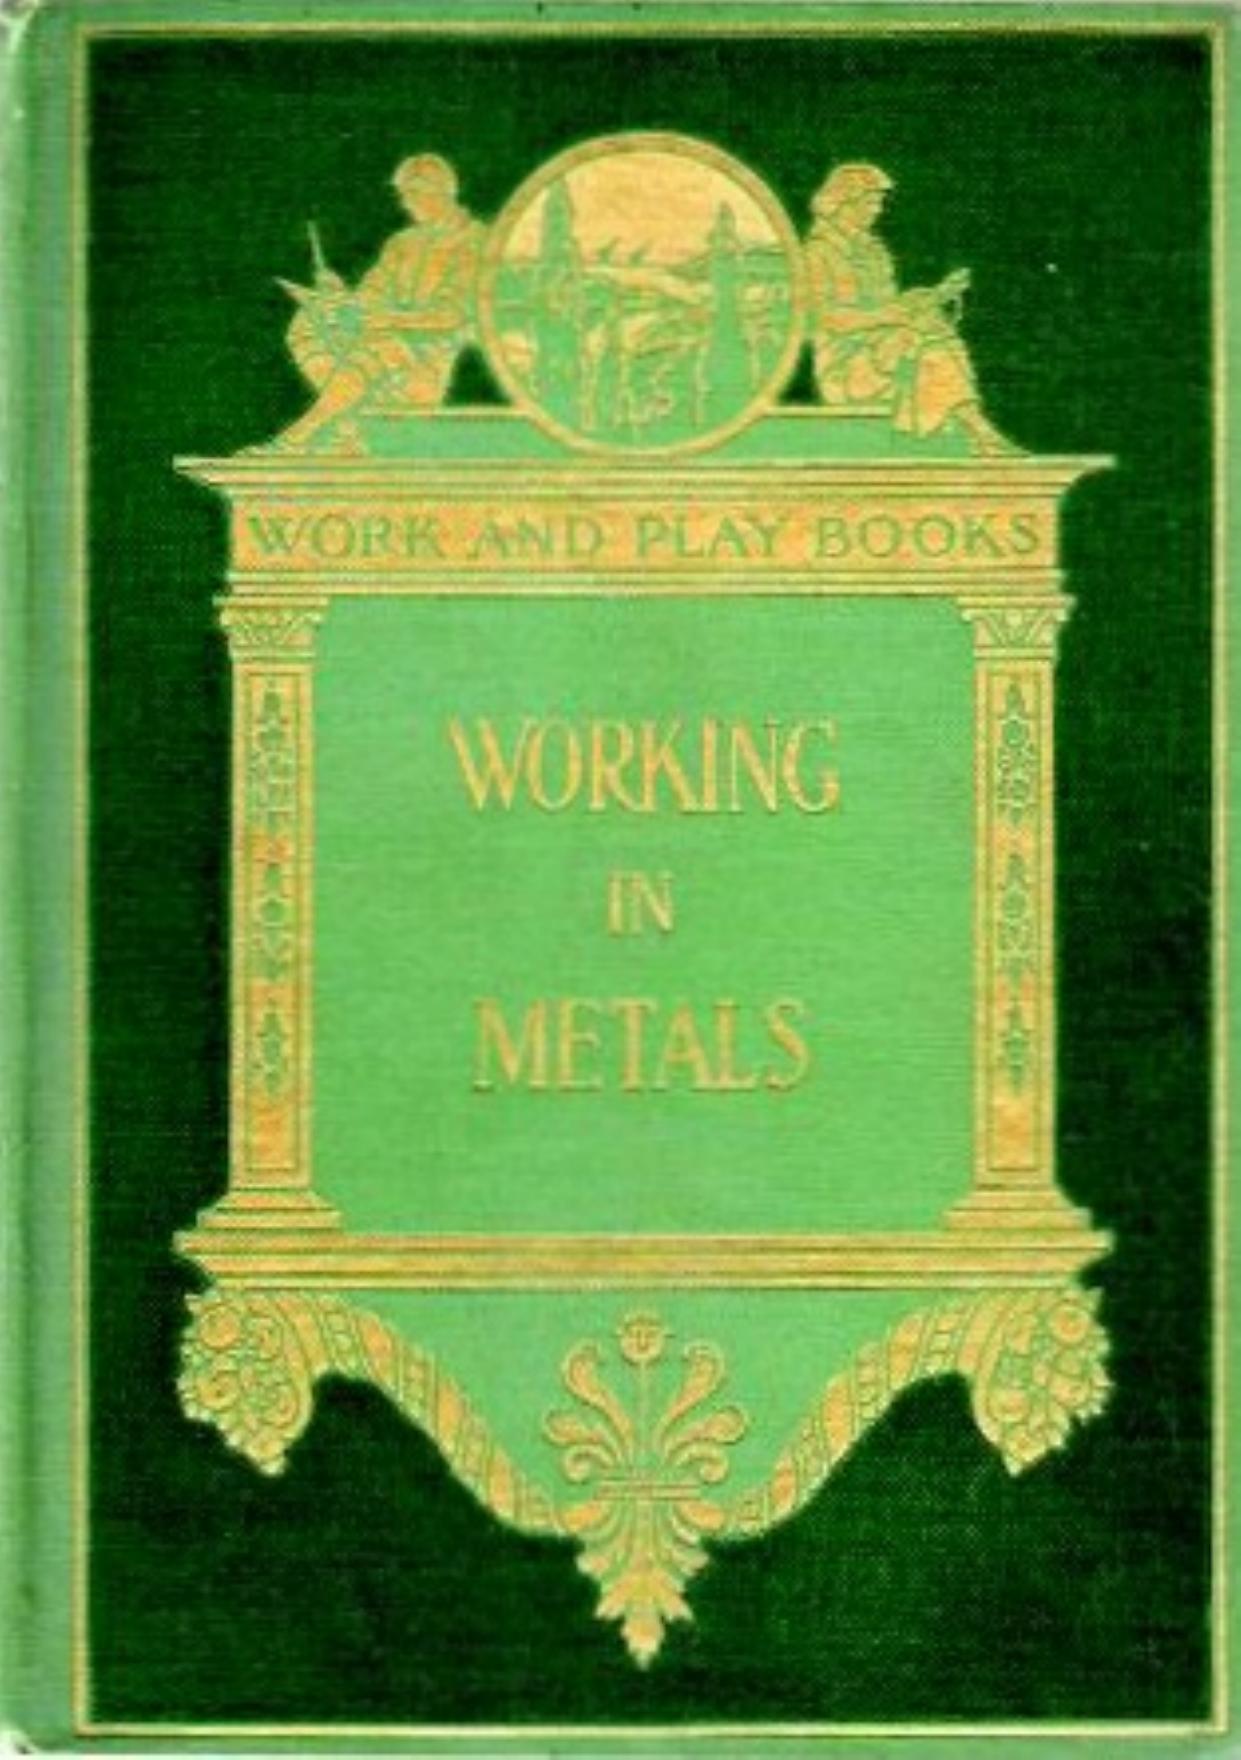 Working in Metals by Charles Conrad Sleffel